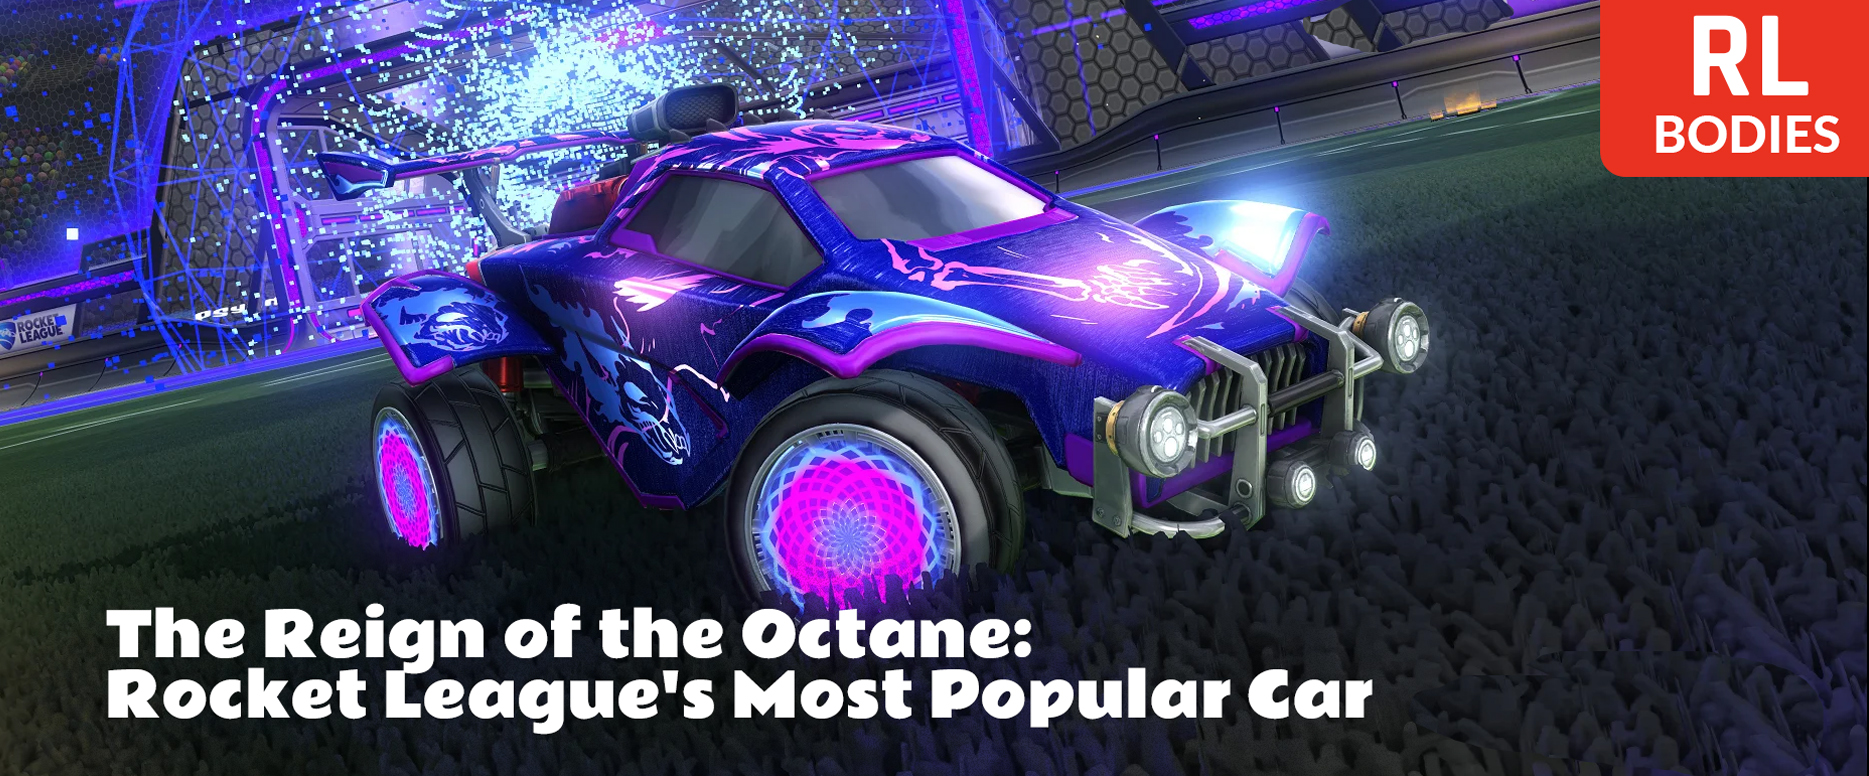 The Reign of the Octane: Rocket League's Most Popular Car